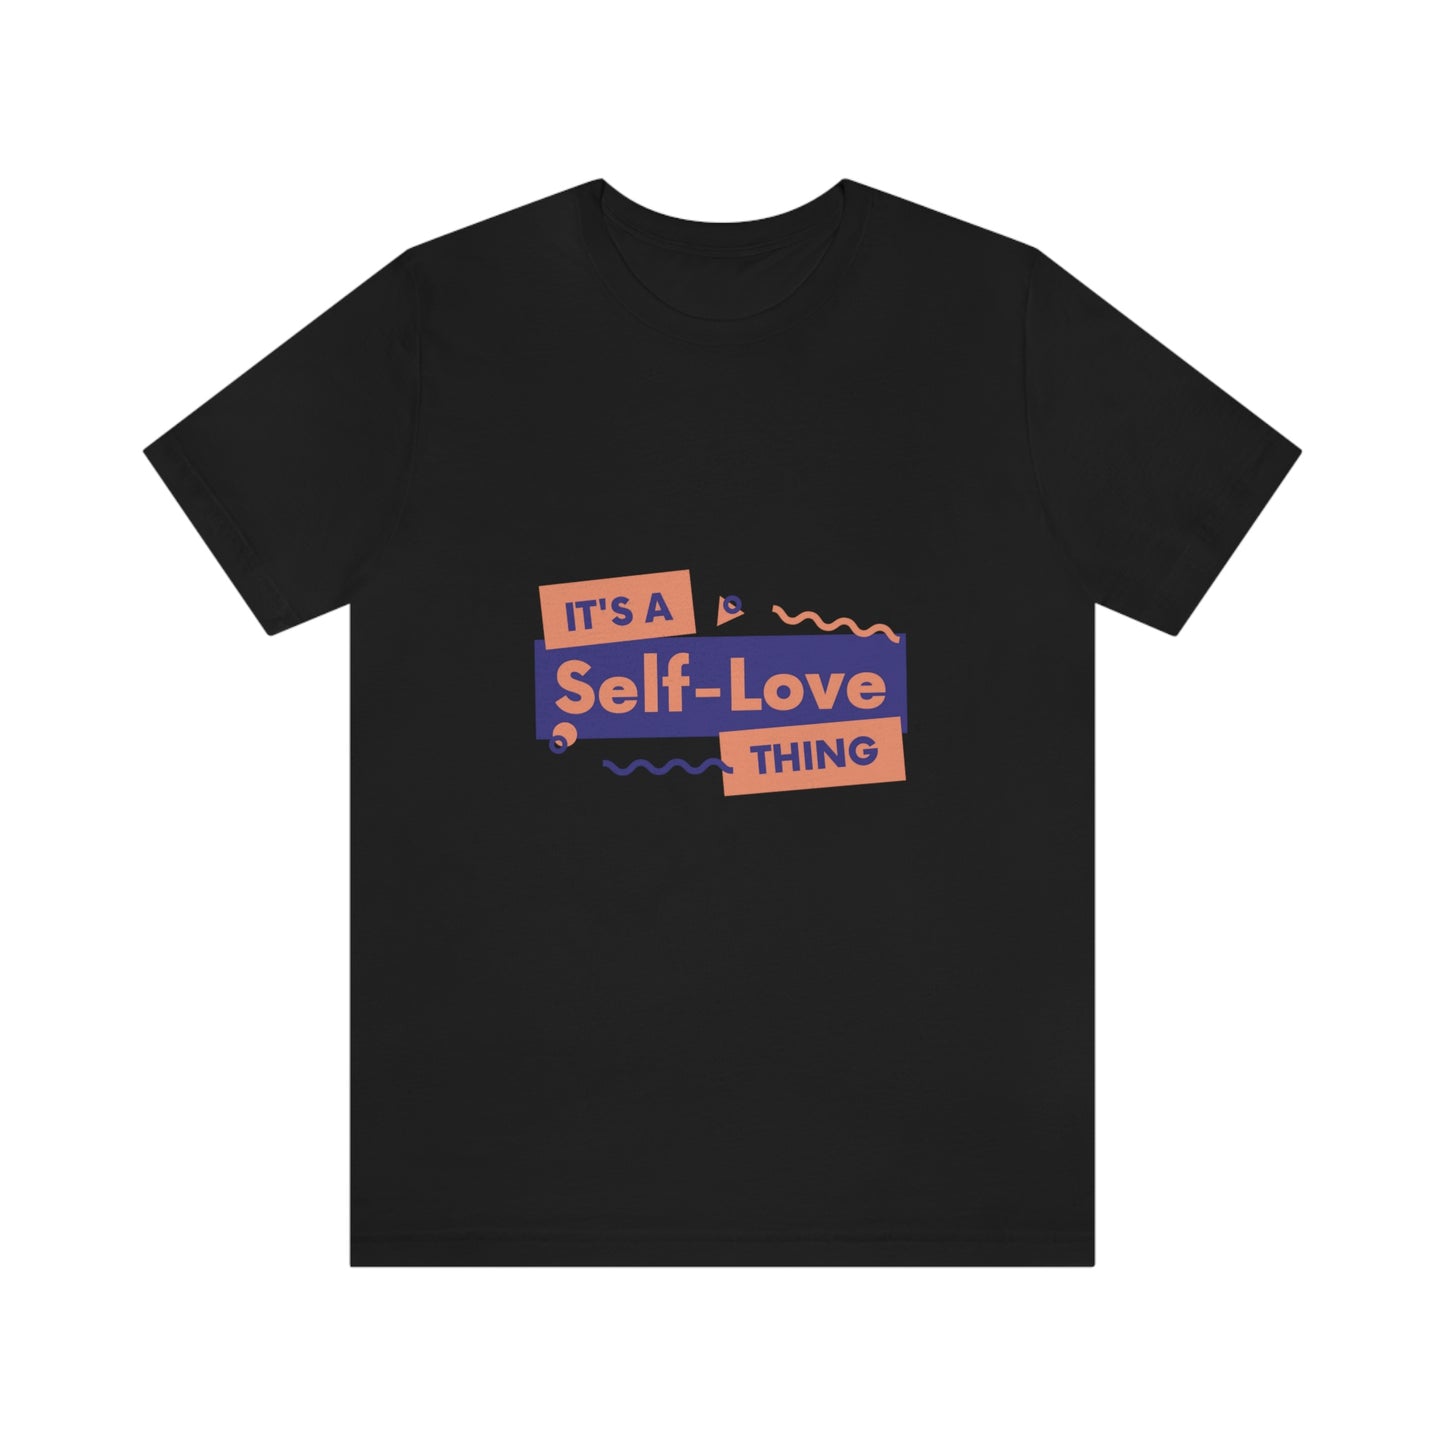 "It's A Self-Love Thing" Unisex Short Sleeve Tee